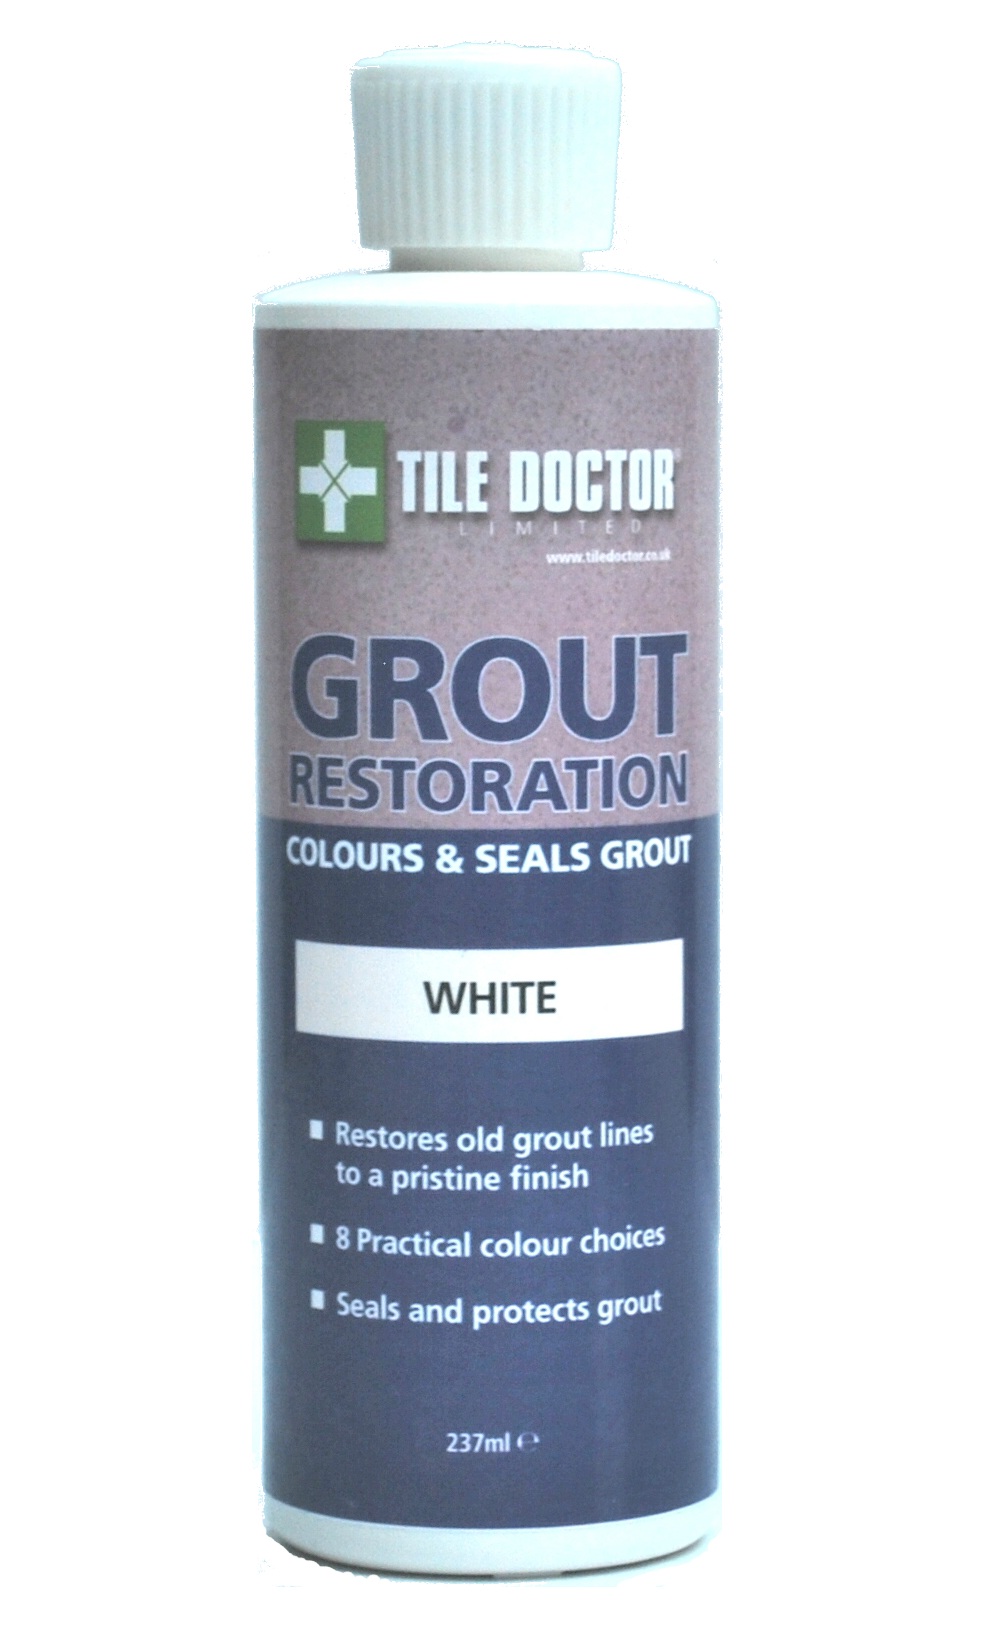 Grout Color Choices - Tile Doctor